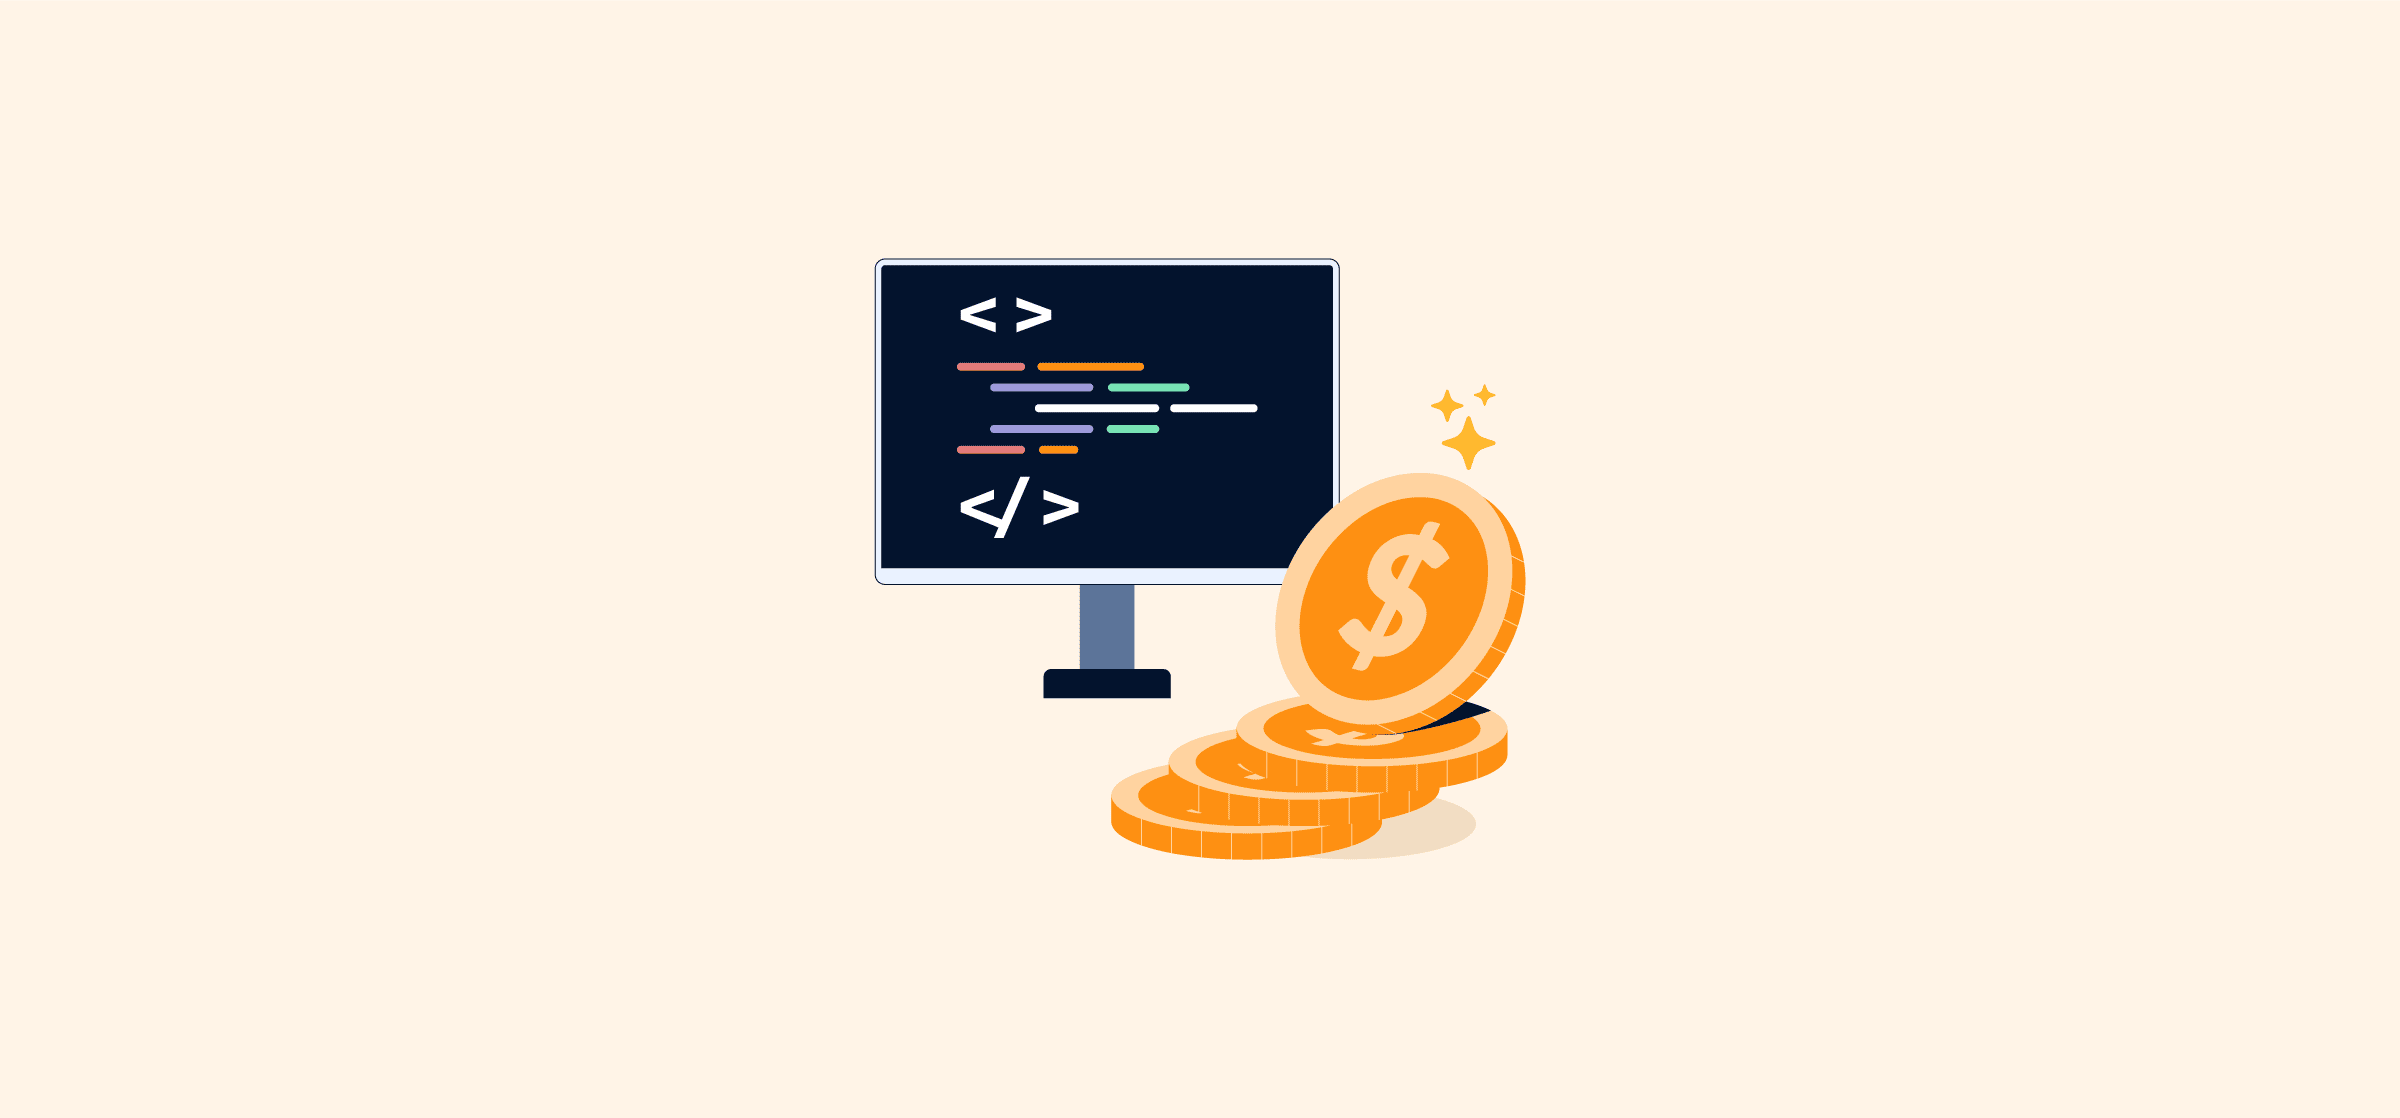 An illustration of a computer monitor and coins, representing software development costs.